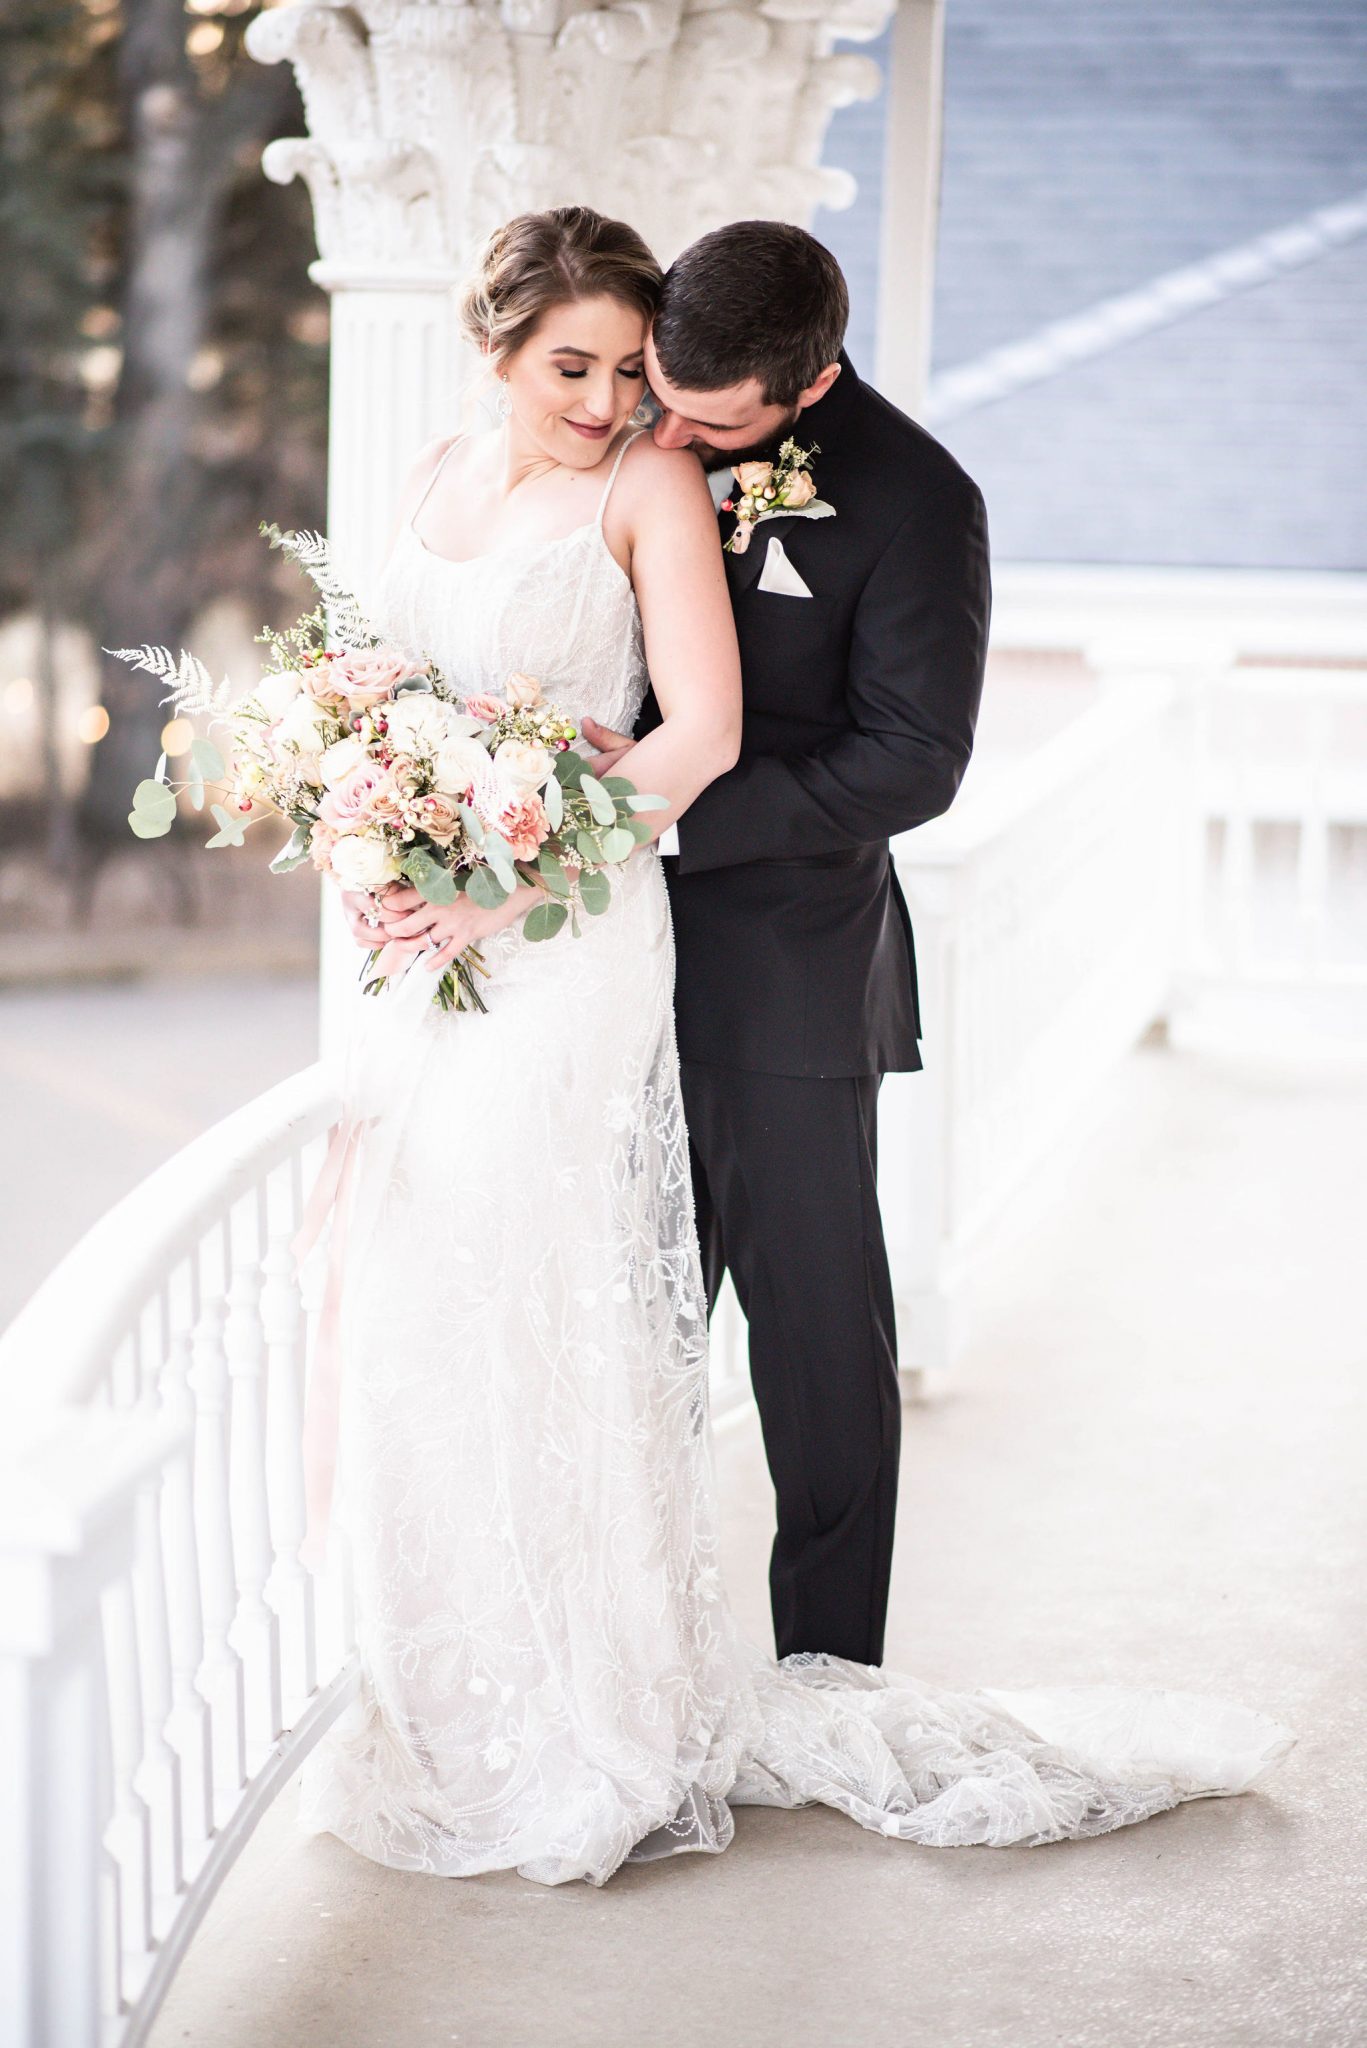 Classically styled bride and groom pose together on the romantic balcony at the Norland Historic Estate Venue